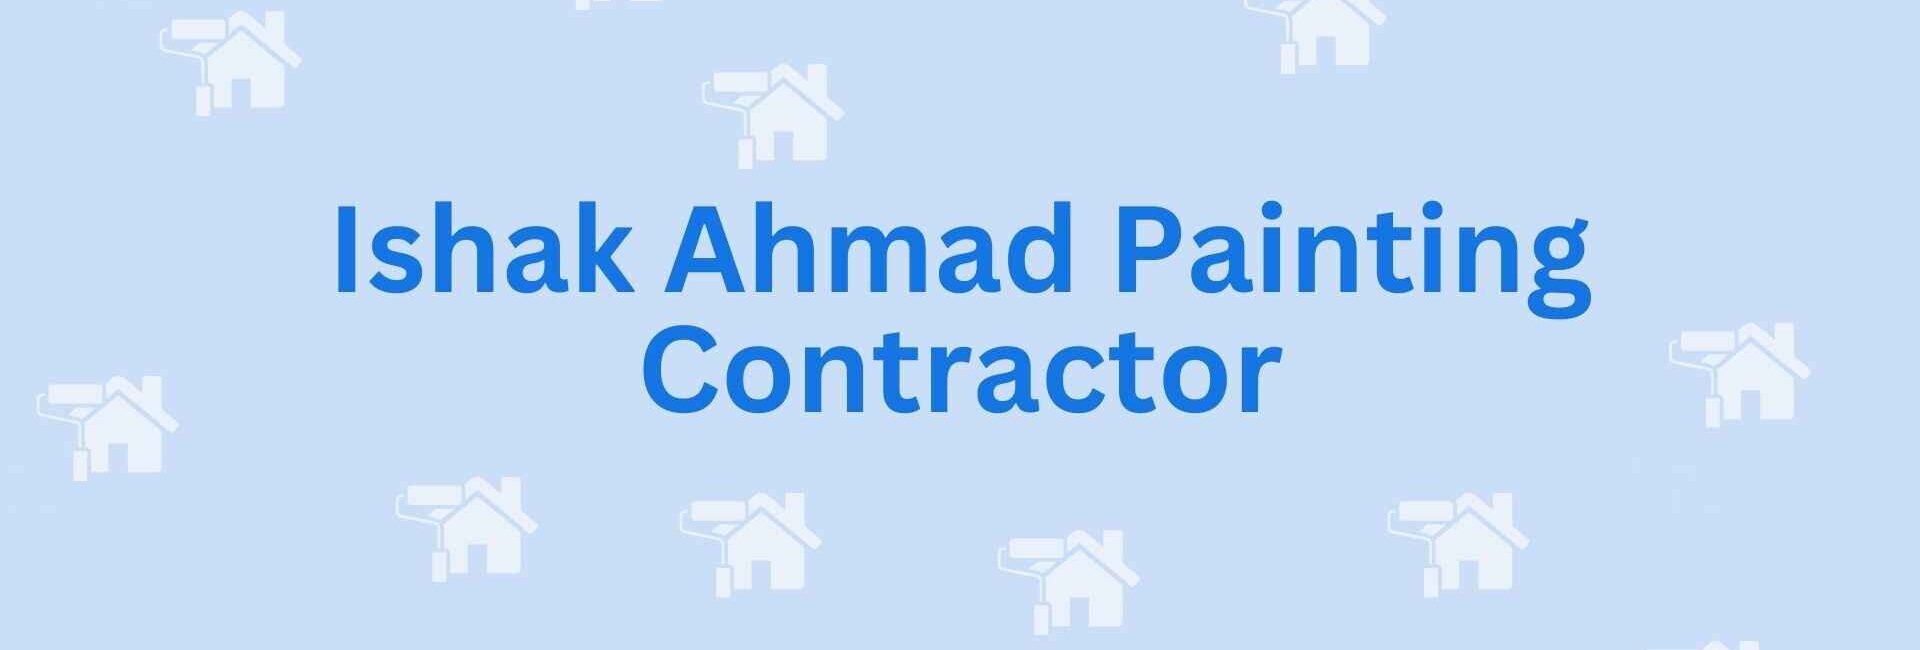 Ishak Ahmad Painting Contractor - painting services in Noida